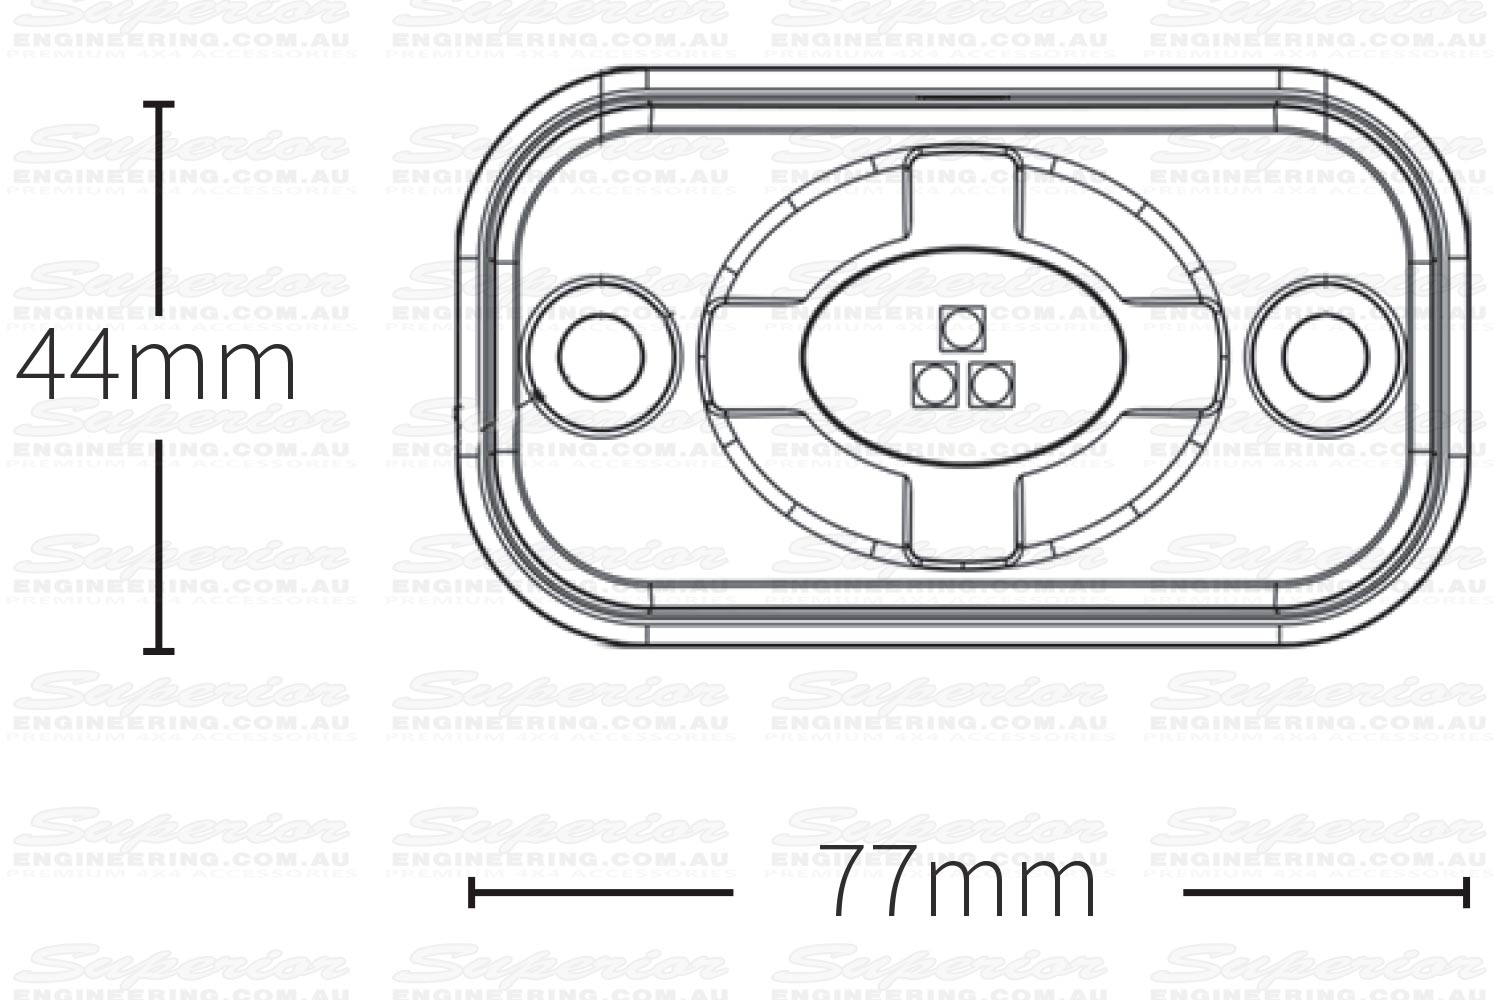 Top view wire diagram of the ROK9 showing the dimensions of 77mm x 44mm